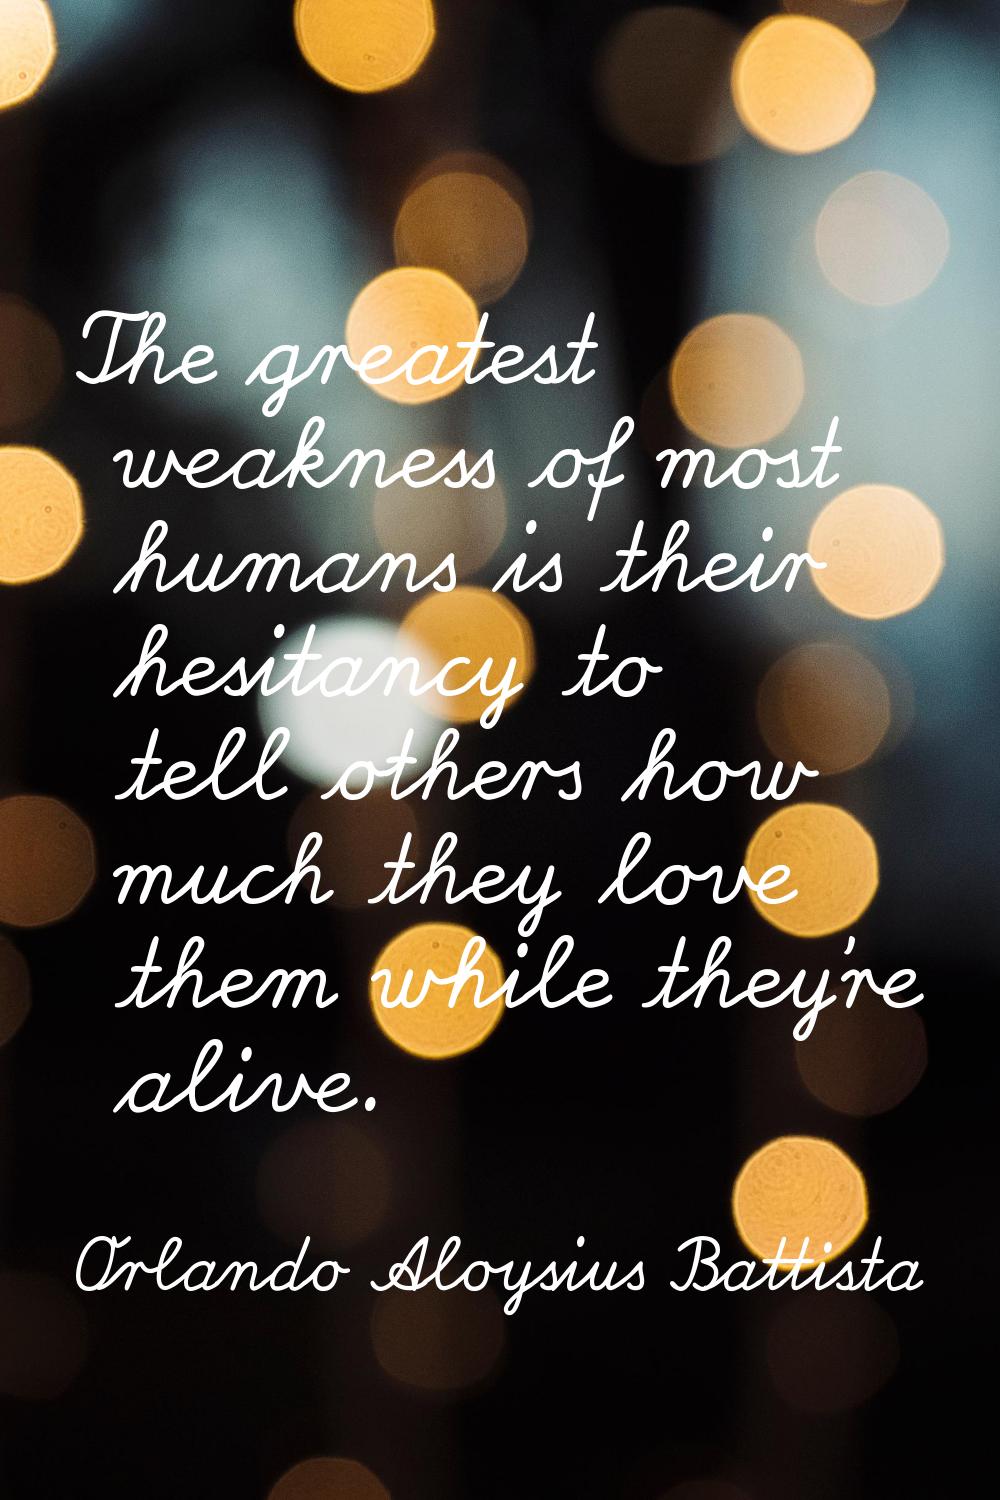 The greatest weakness of most humans is their hesitancy to tell others how much they love them whil